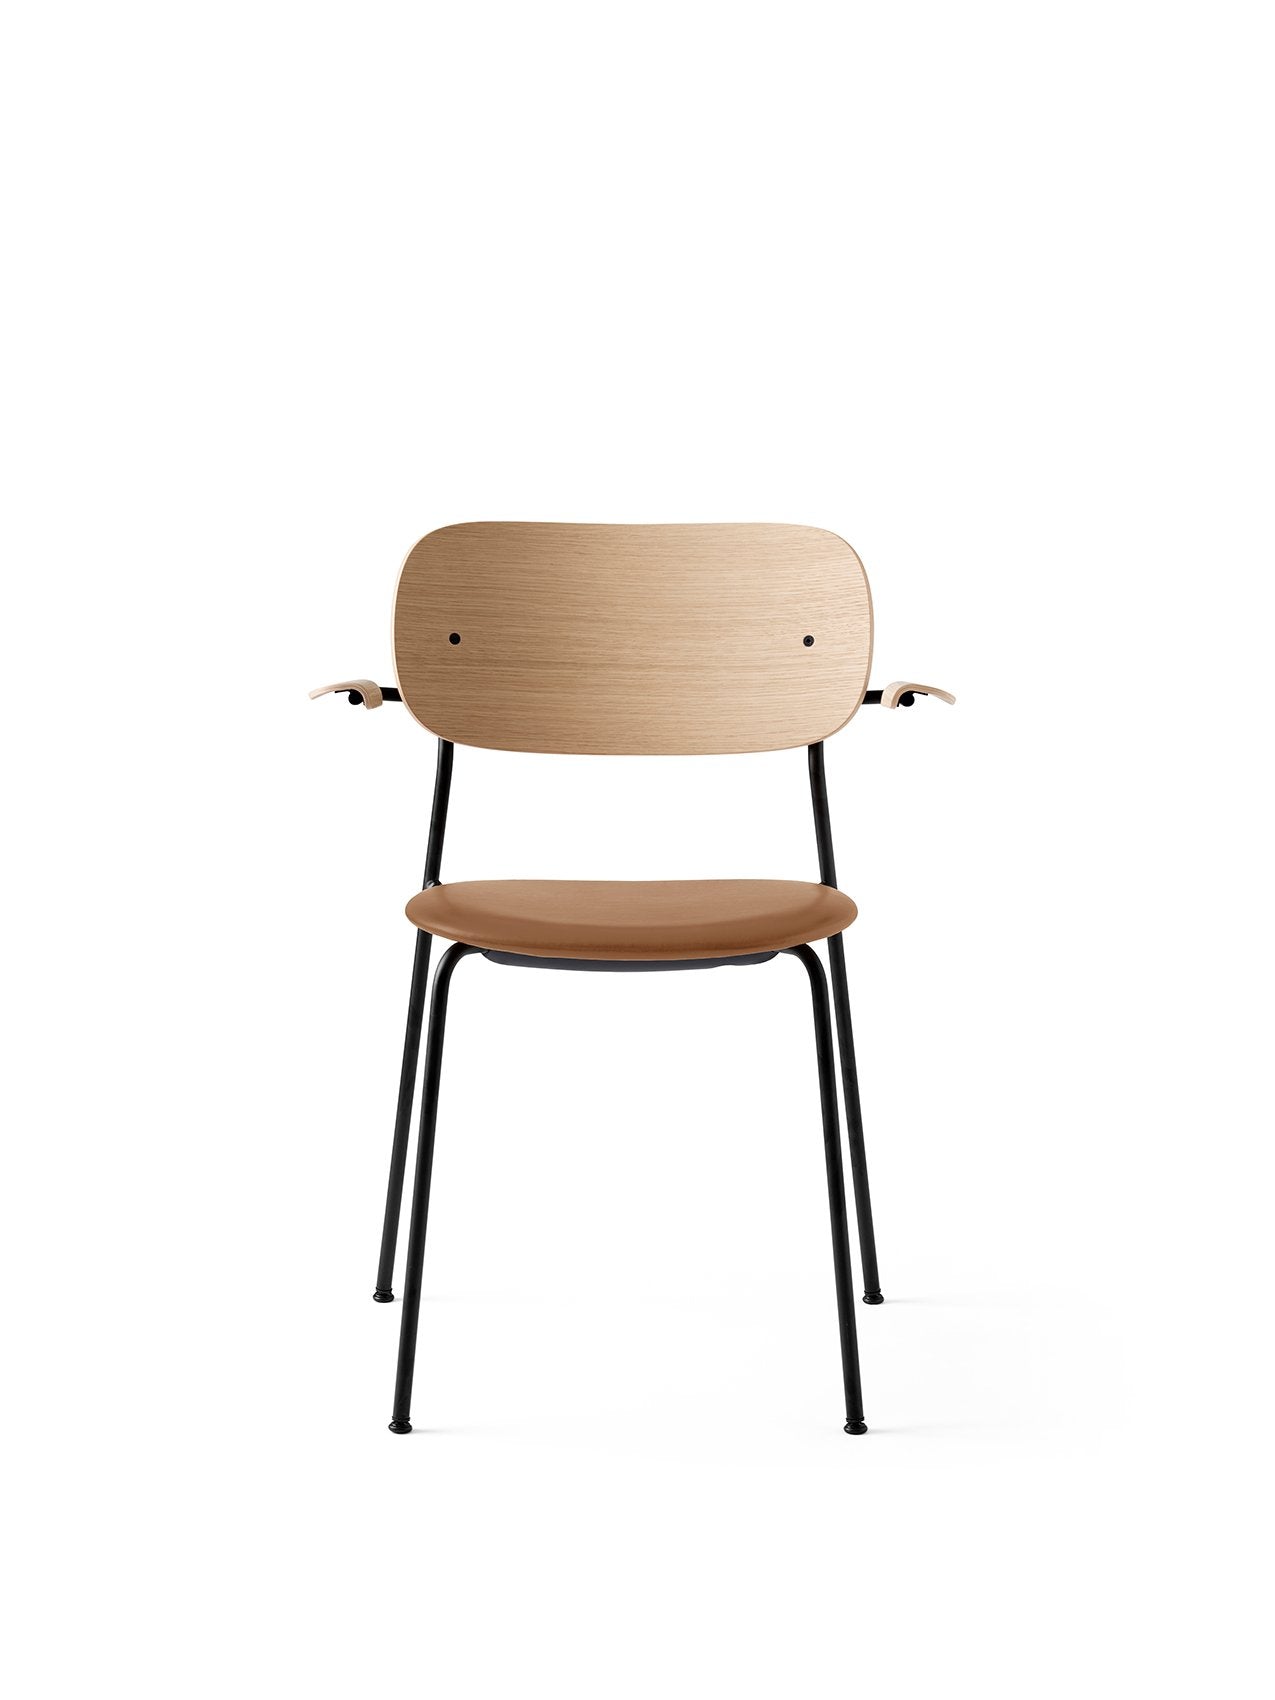 Co Chair, Upholstered-Chair-MENU Design Shop